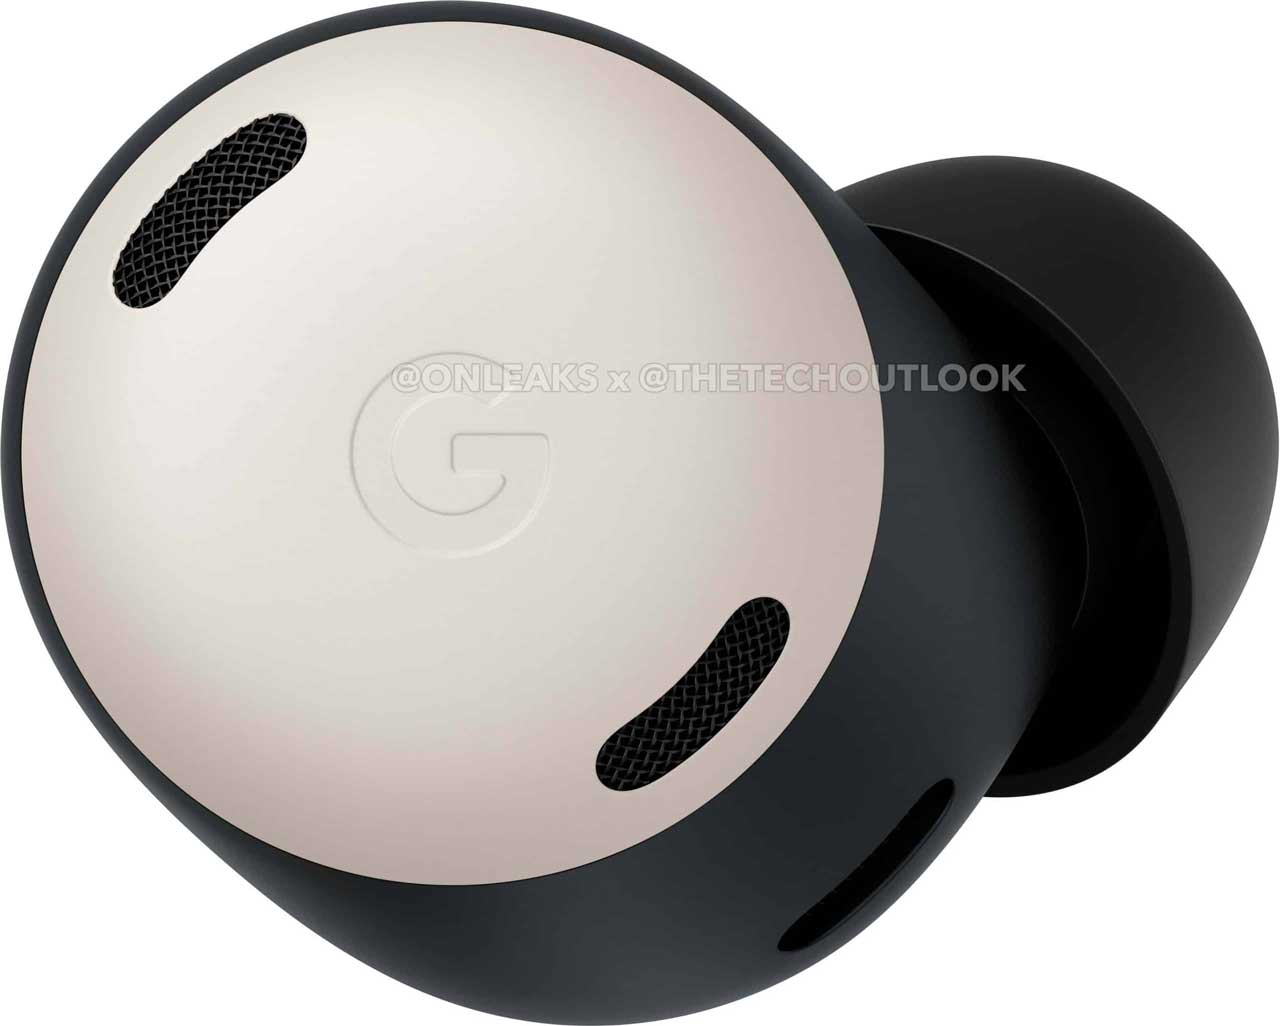 These are what the new Pixel Buds Pro colors look like